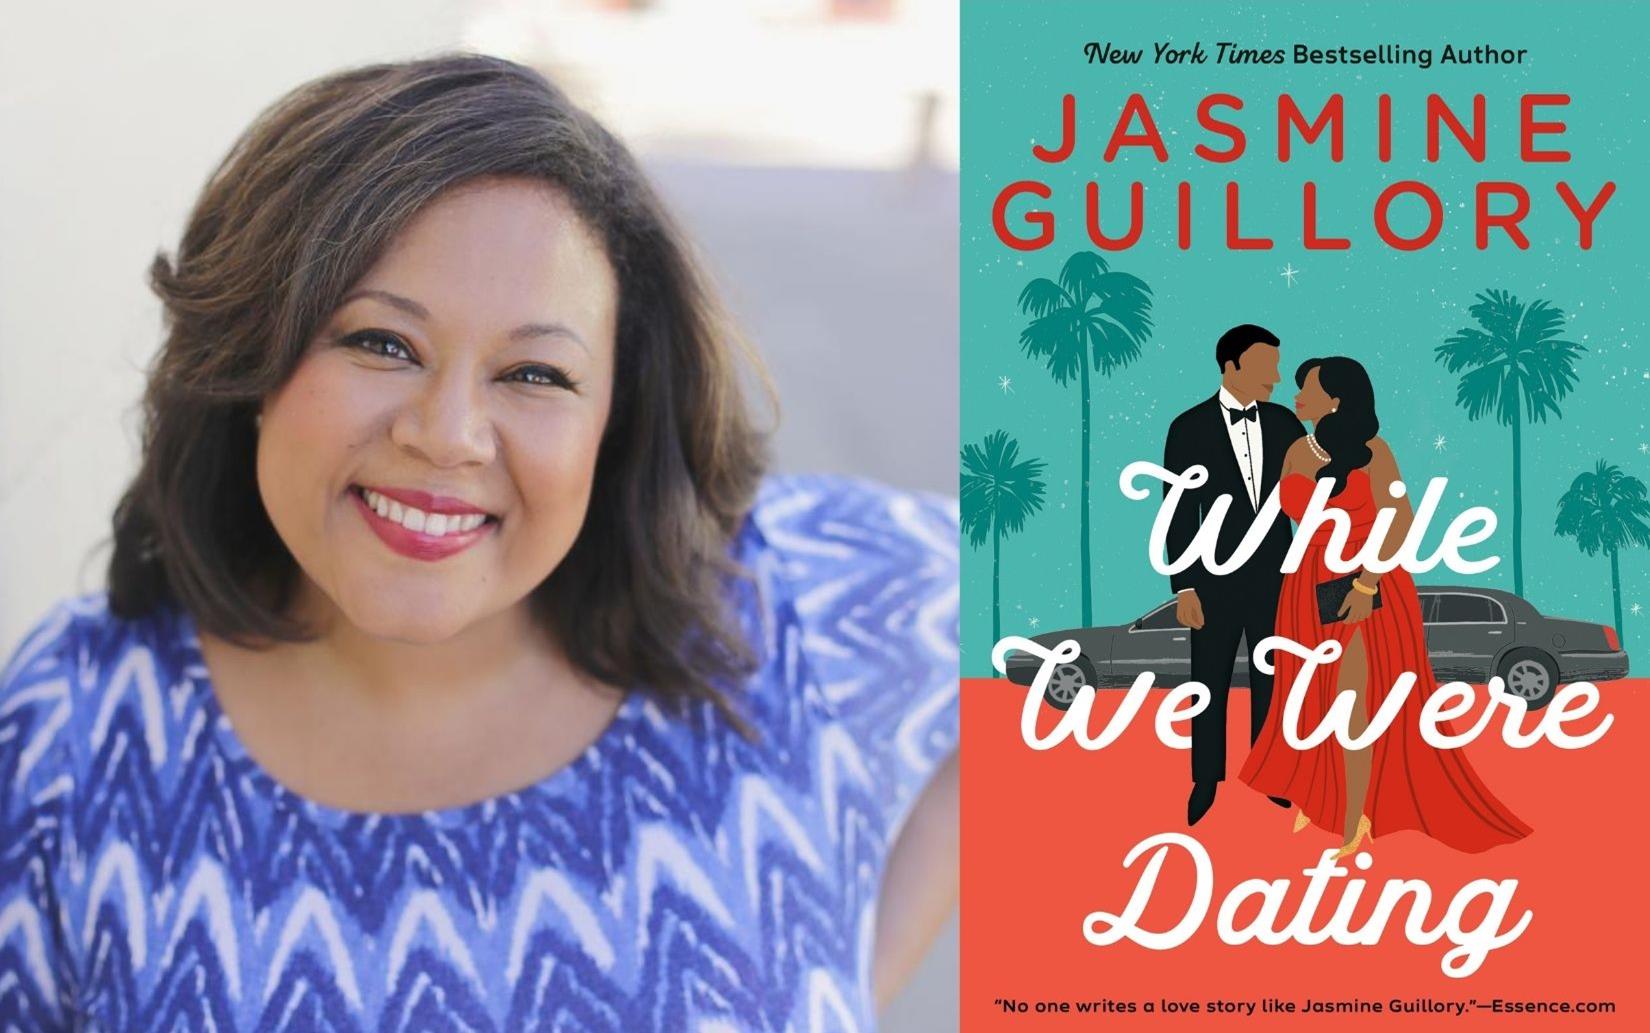 Jasmine Guillory portrait and While We Were Dating book cover